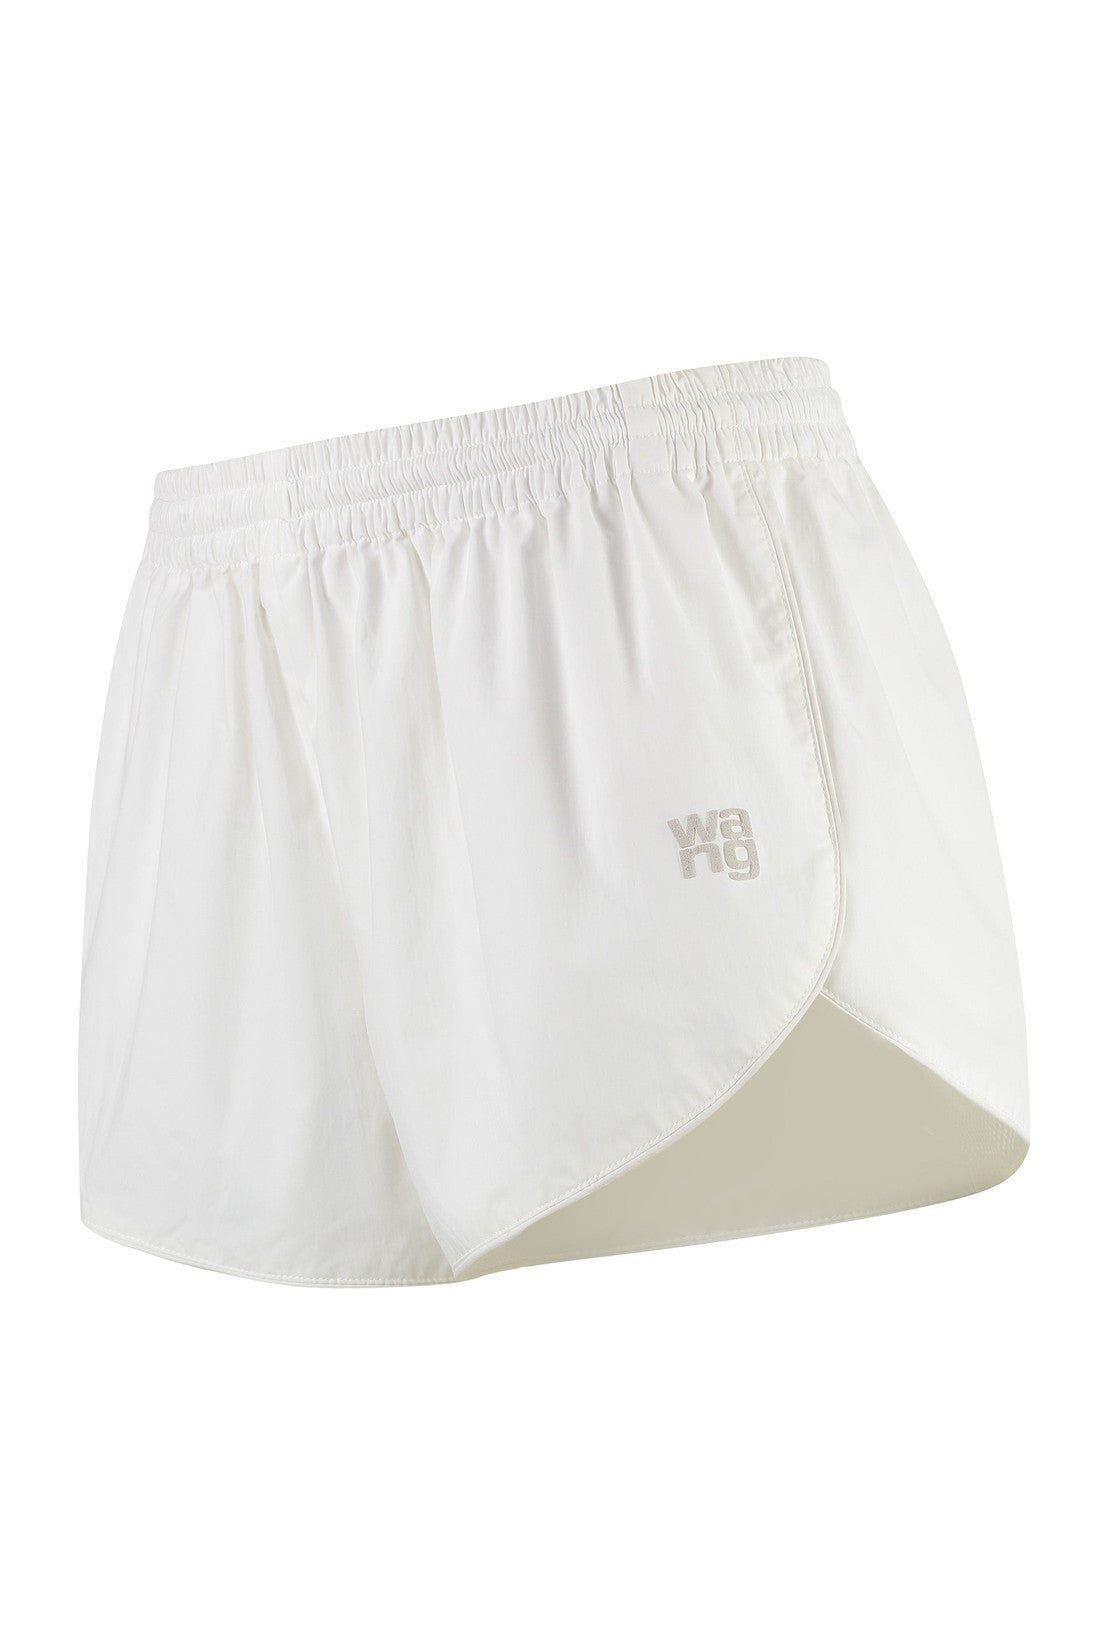 Alexander Wang-OUTLET-SALE-Techno fabric shorts-ARCHIVIST